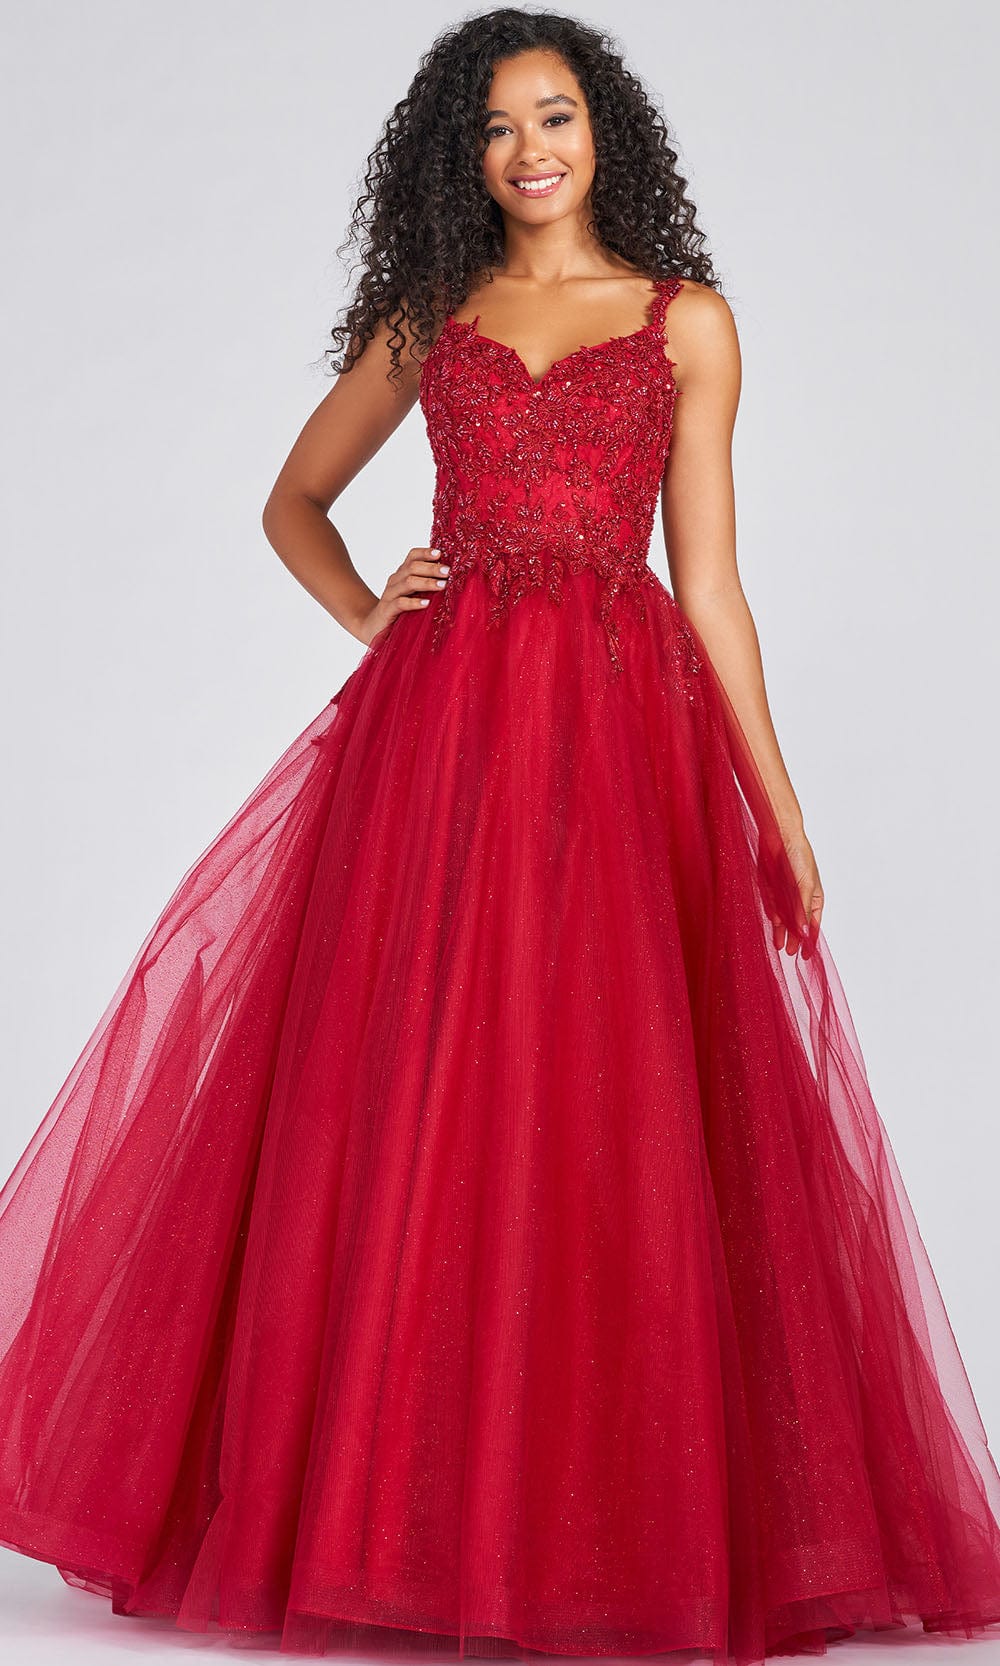 Colette By Daphne CL12205 - Beaded Glitter Tulle Ball Gown Prom Dresses 00 / Scarlet